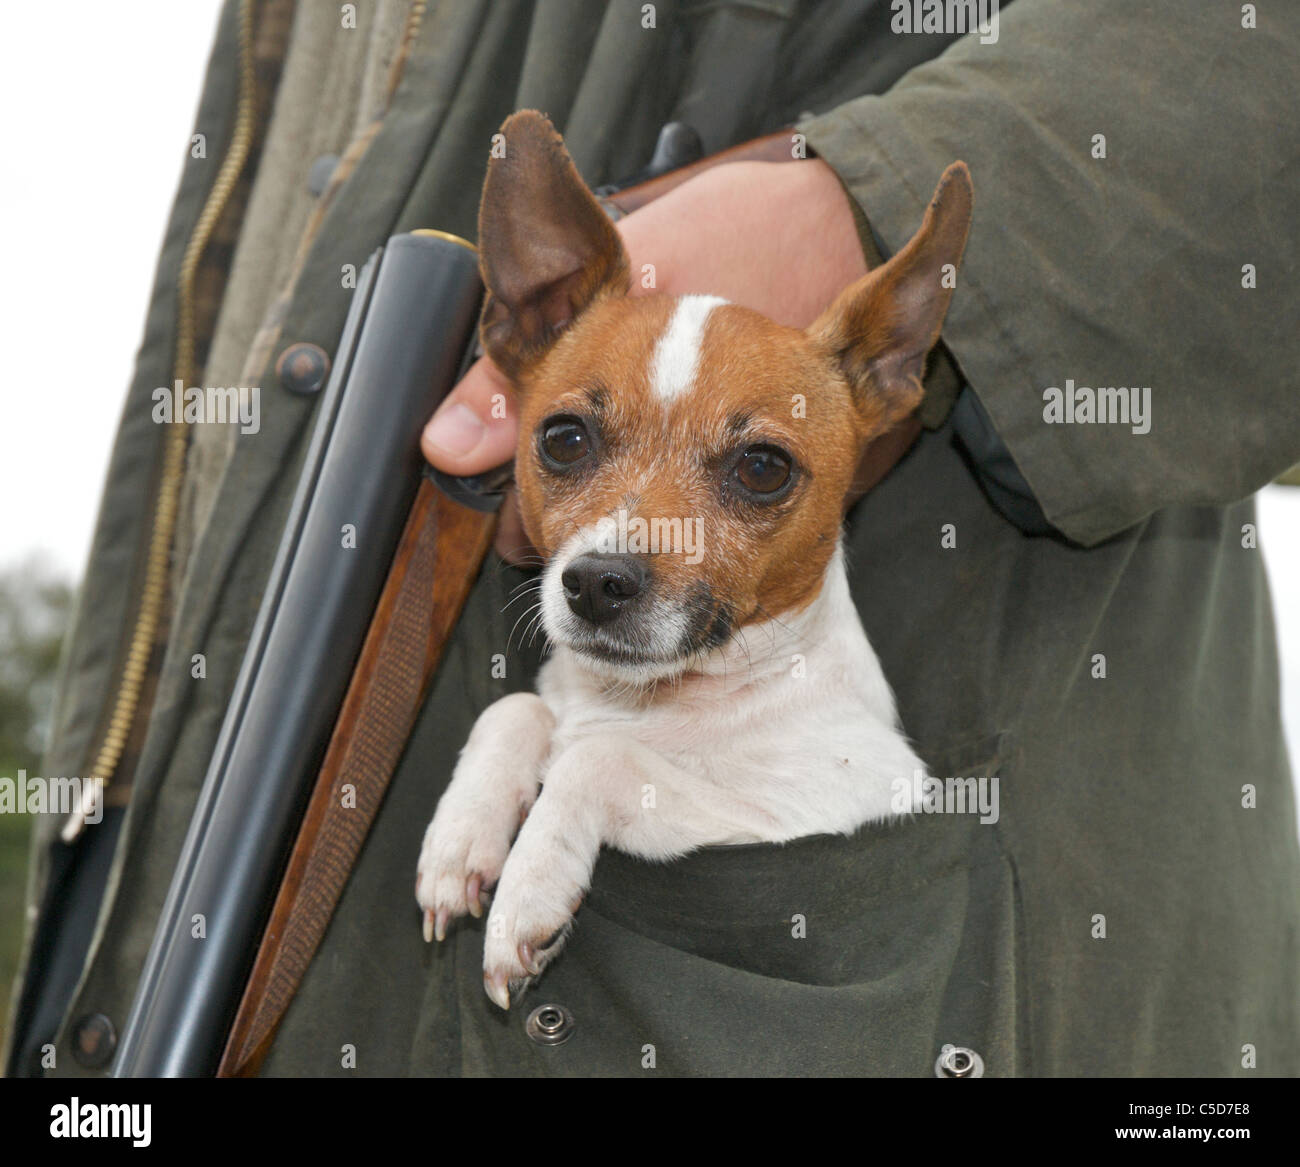 The small Jack Russell dog is often described as 'pocket sized' Stock Photo